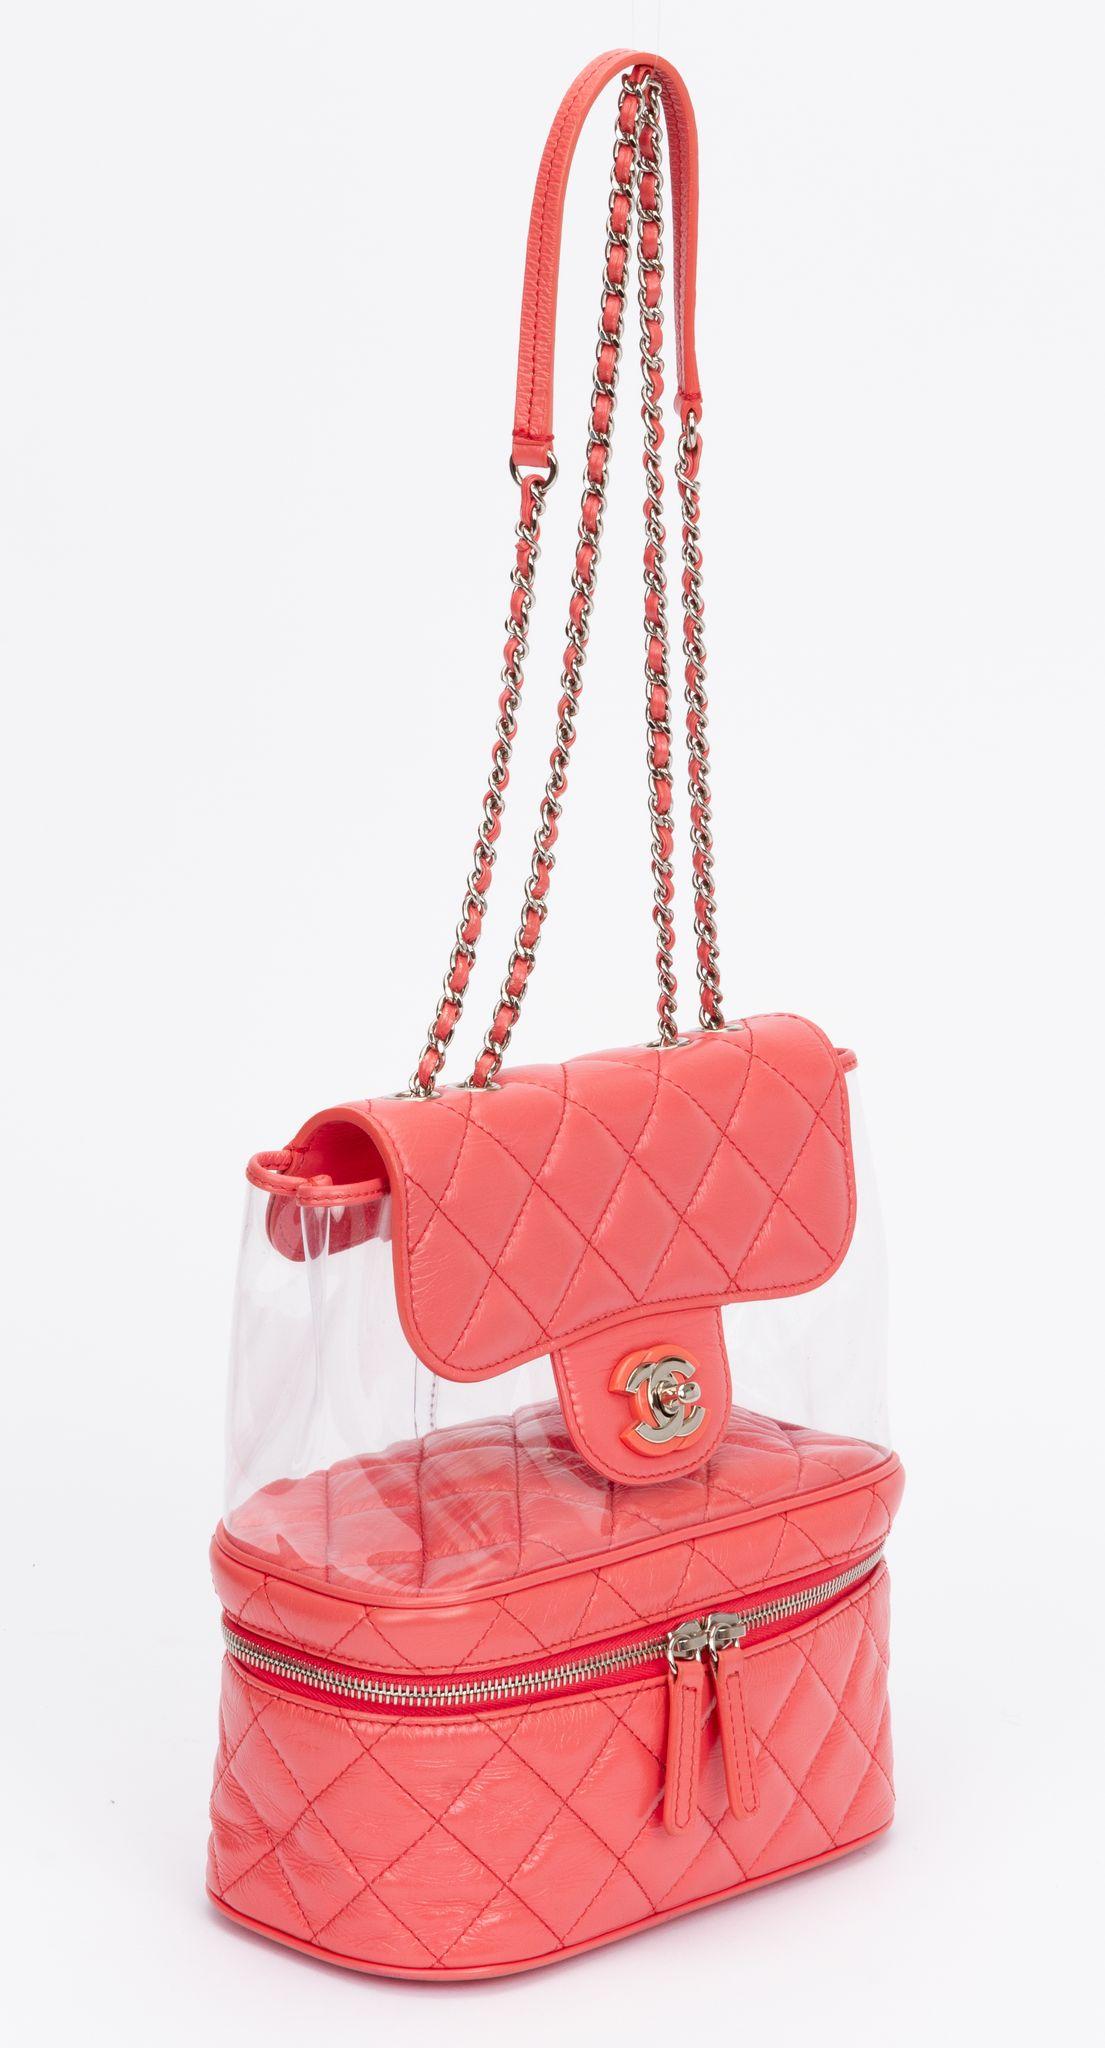 Chanel 2 way pink pvc collectible bag. Shoulder tote or cross body. Comes with hologram, card and generic dust cover. Collection 25.
